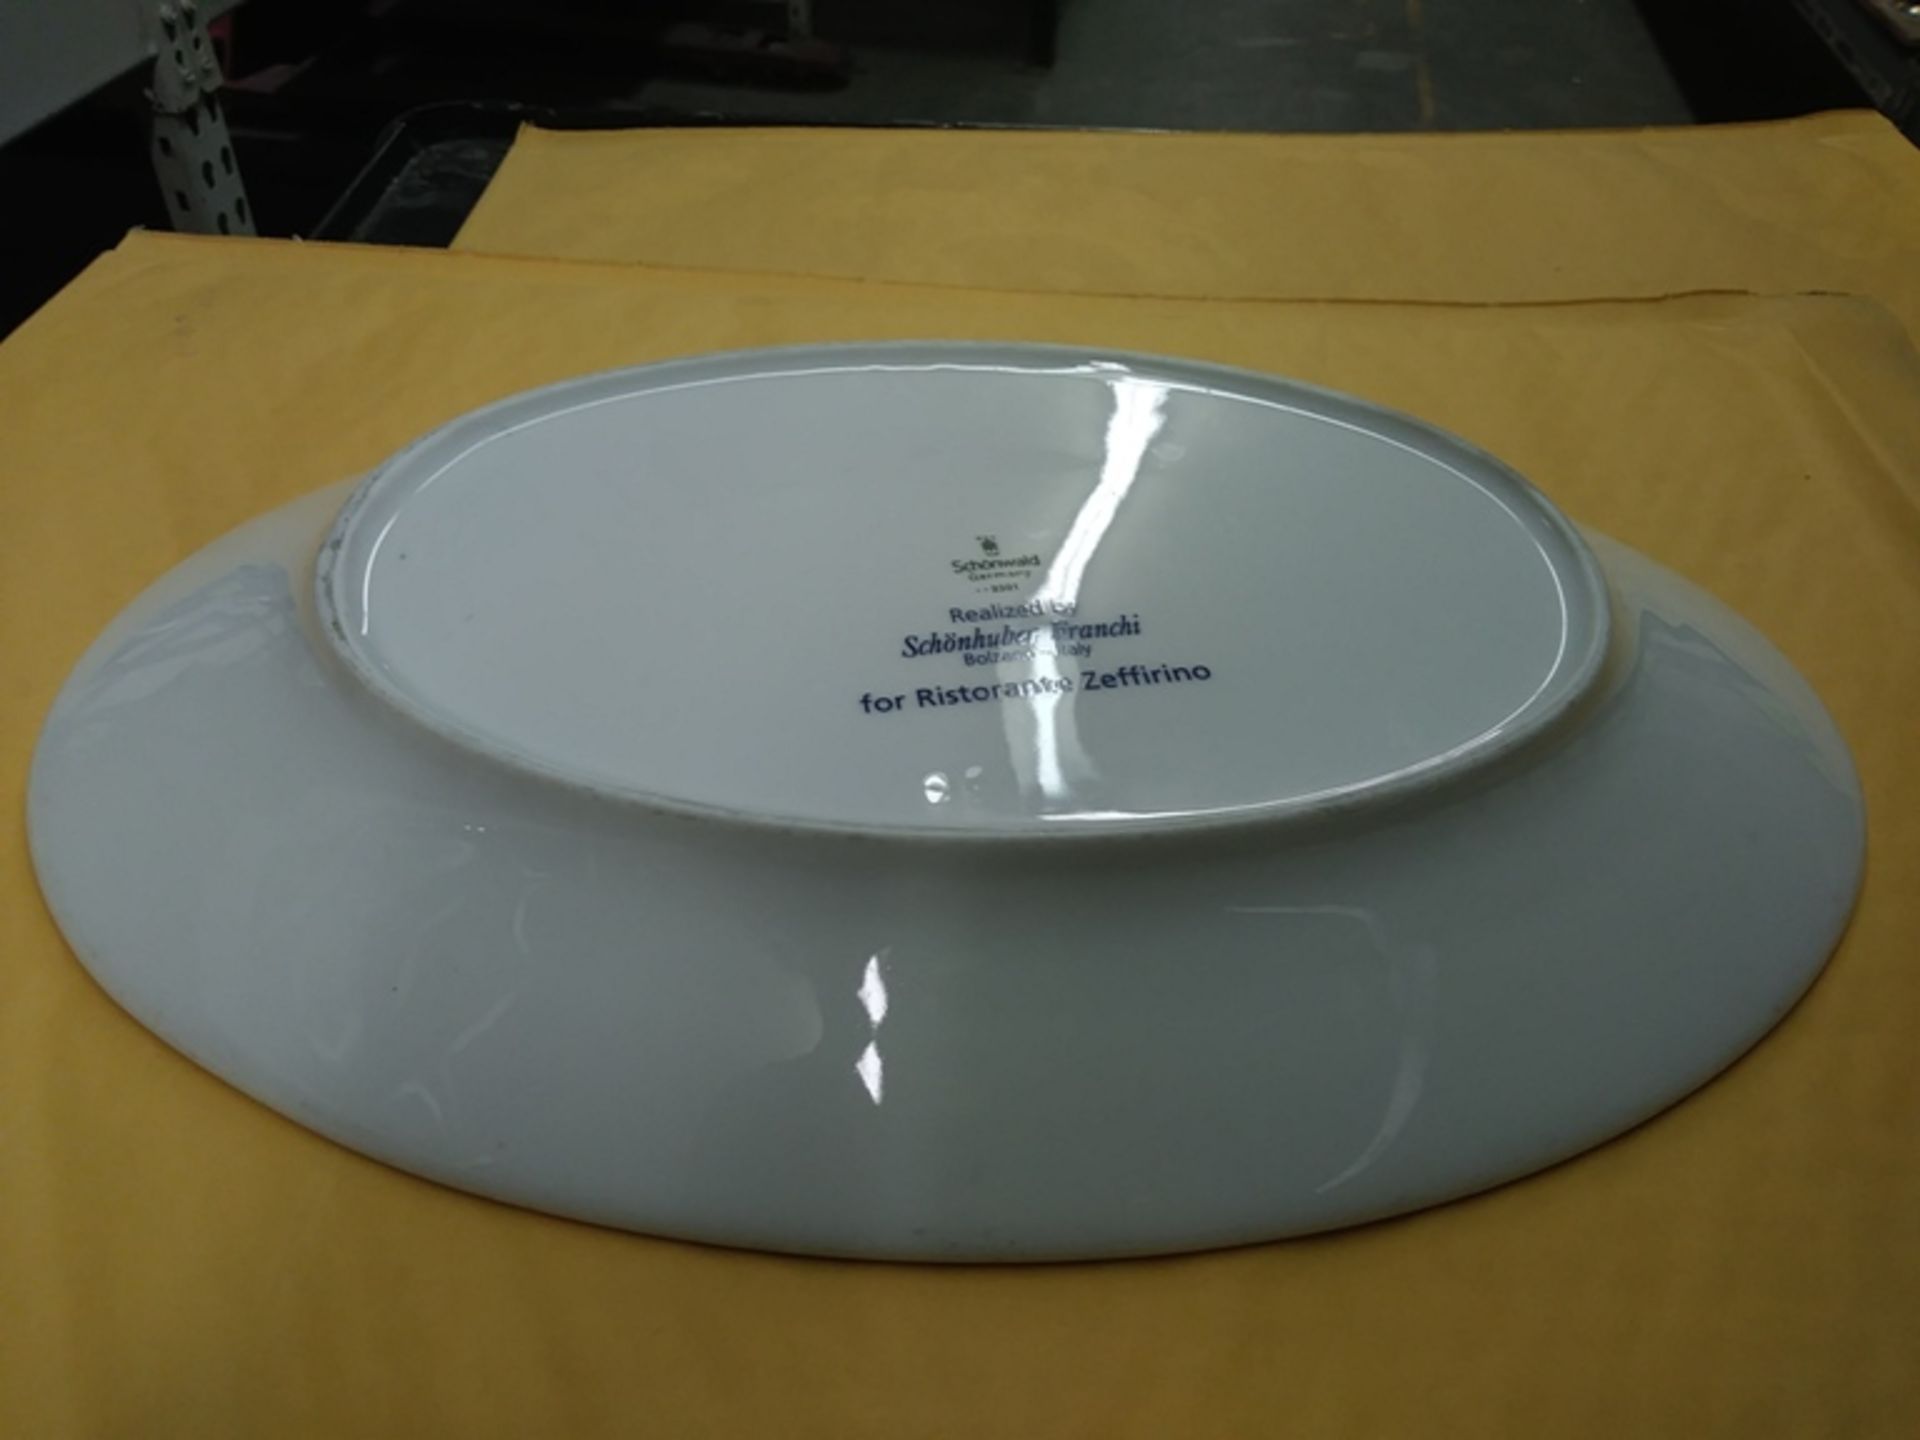 NEW 14" X 9" SCHONWALD OVAL PLATTER (INCLUDES QTY: 7) - Image 3 of 4